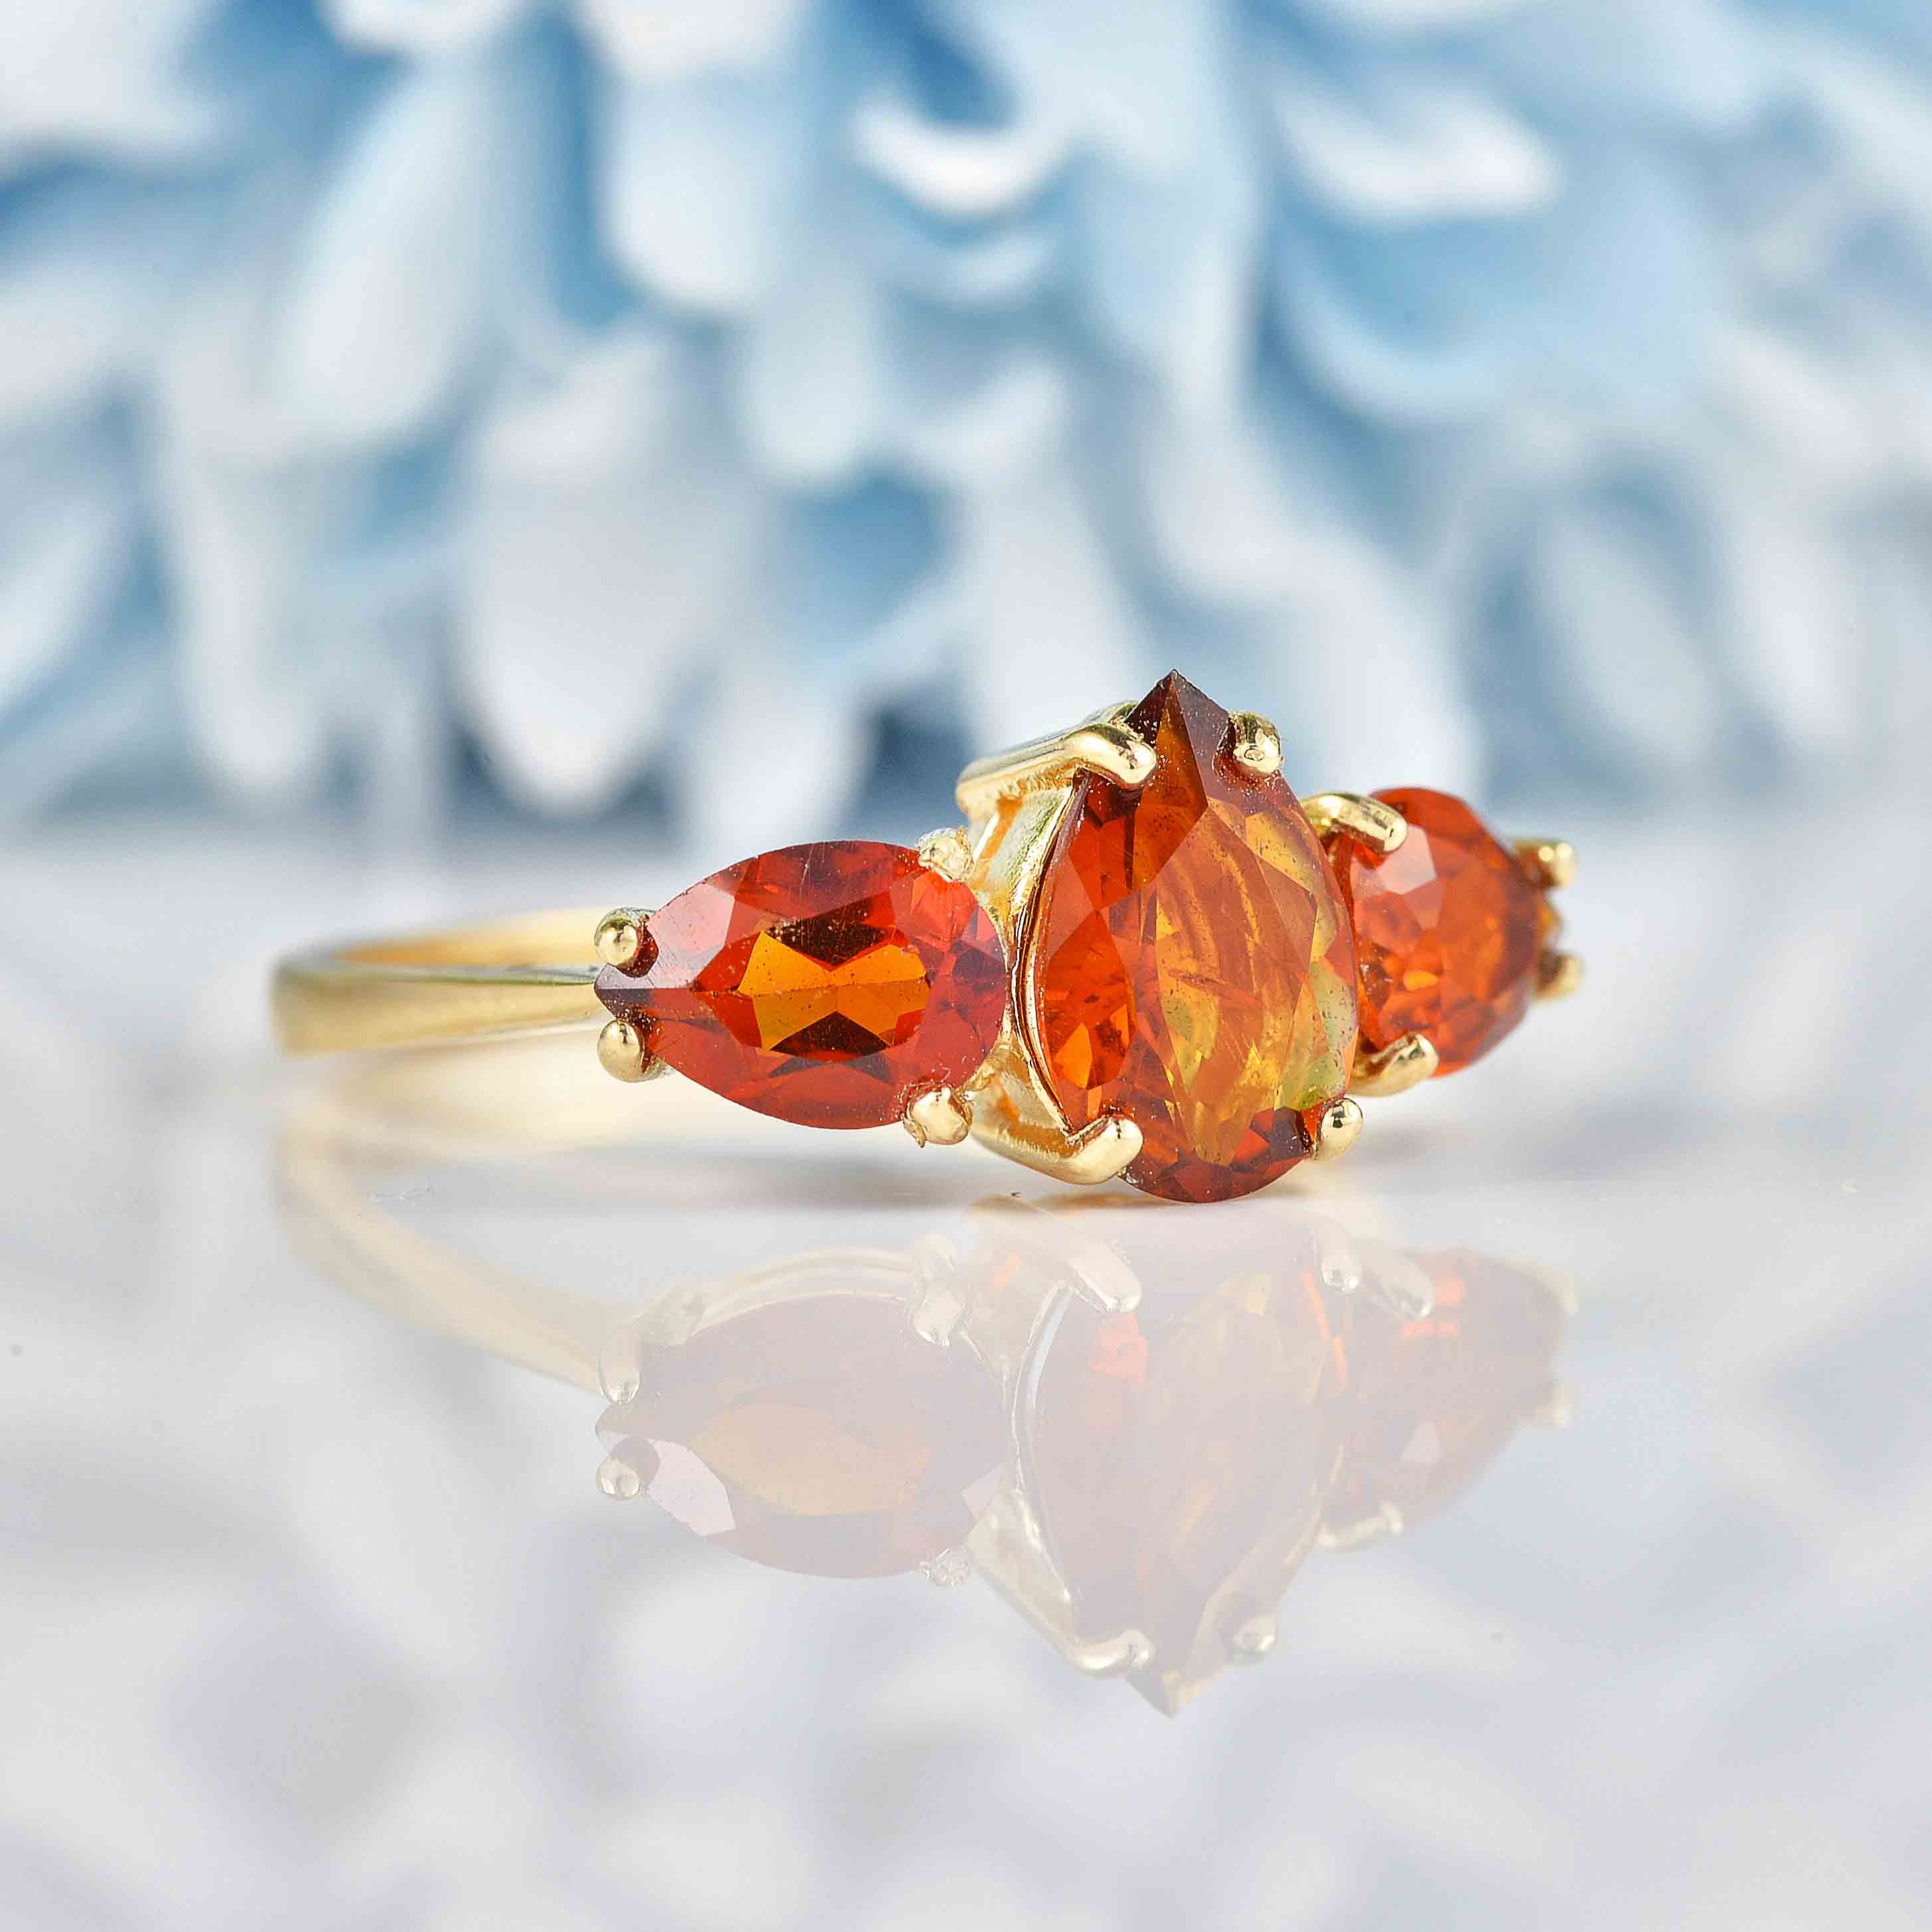 Ellibelle Jewellery Citrine 9ct Gold Pear-Shaped Trilogy Ring